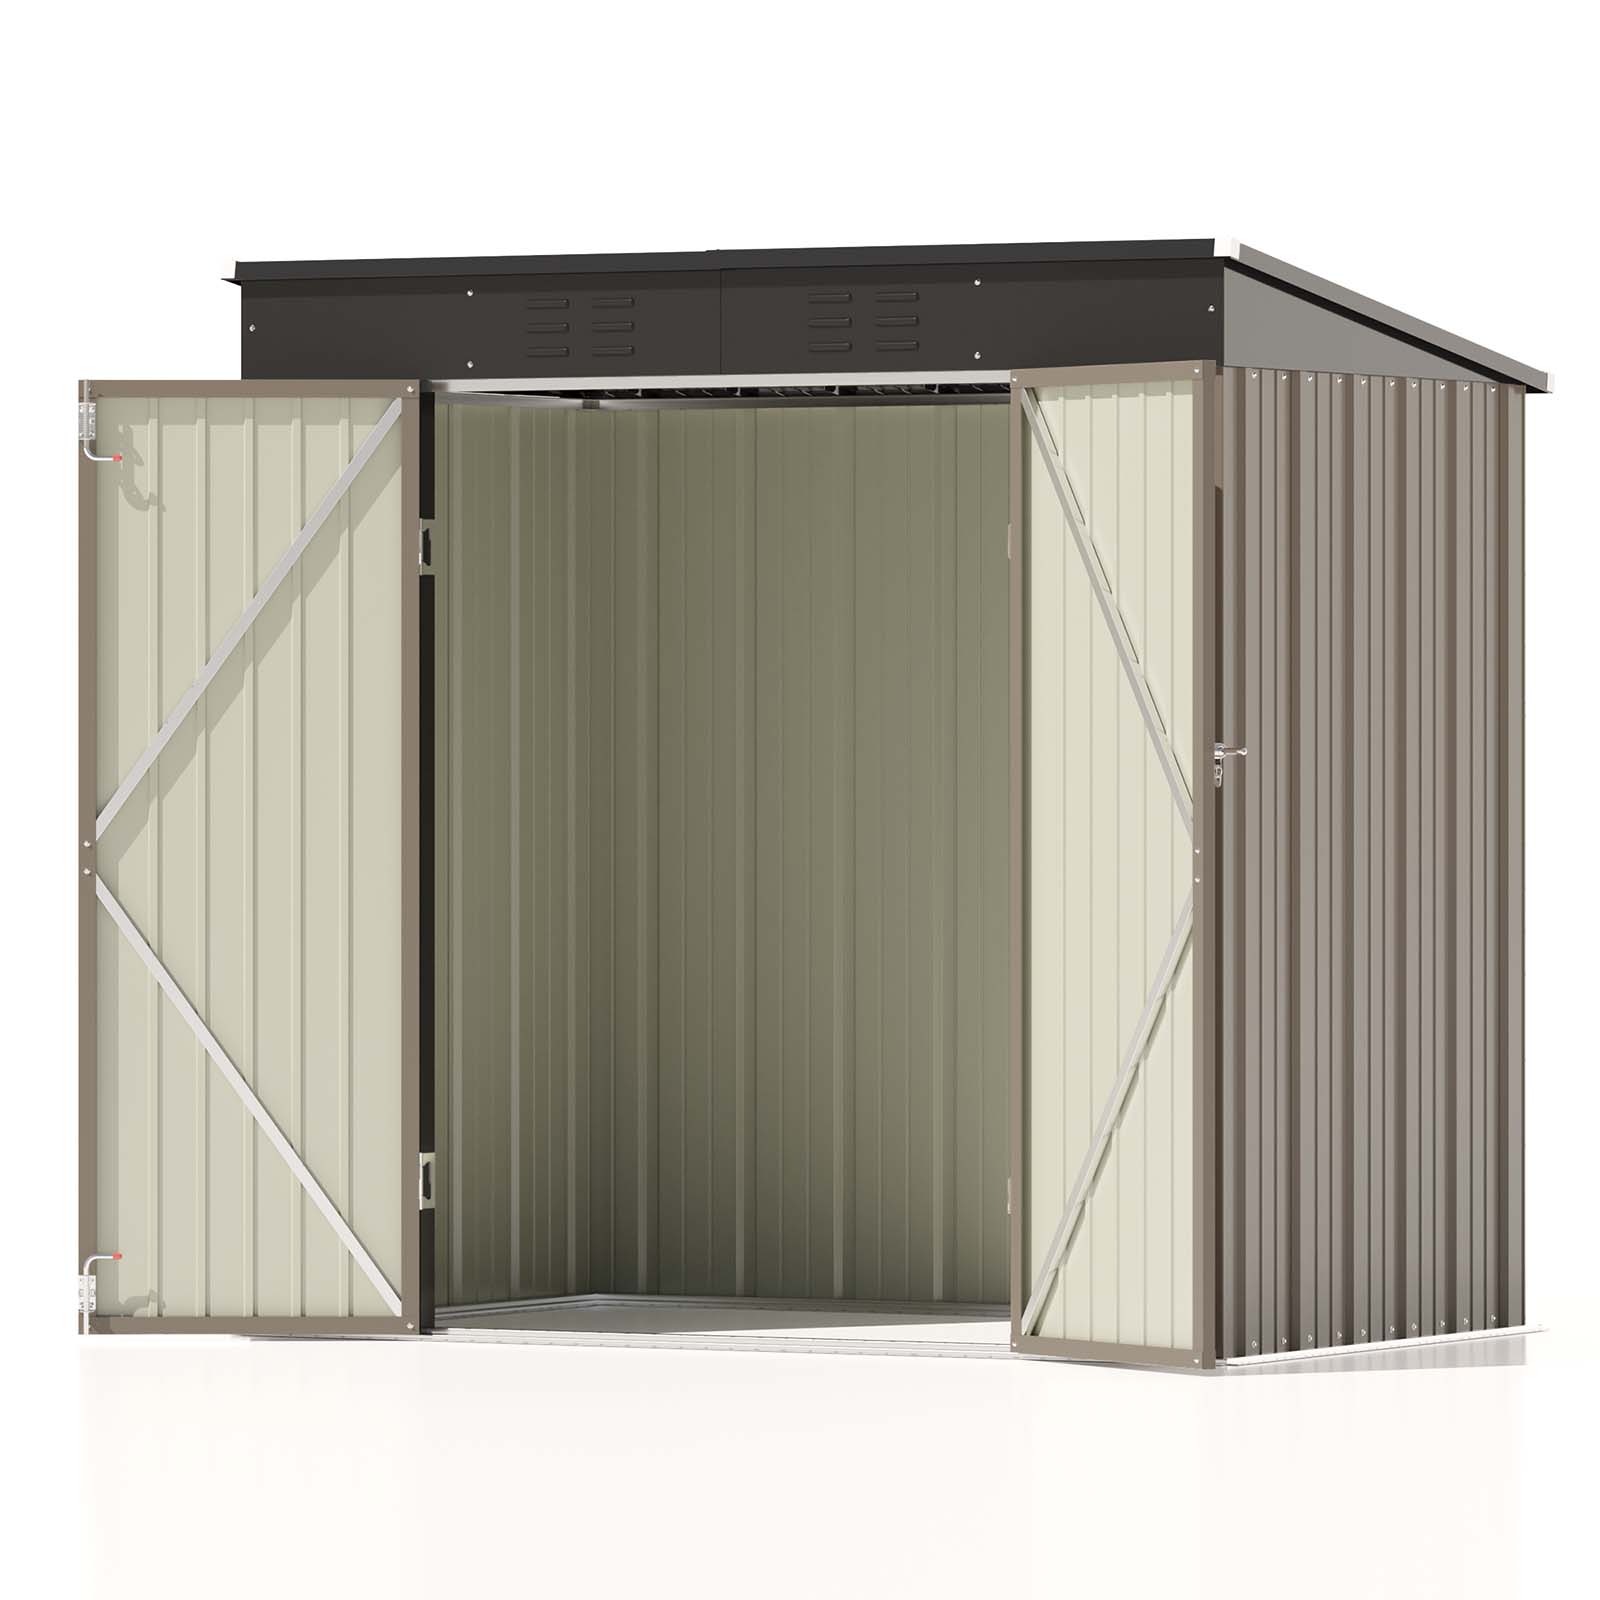 Patiowell 6x4 Metal Shed-2